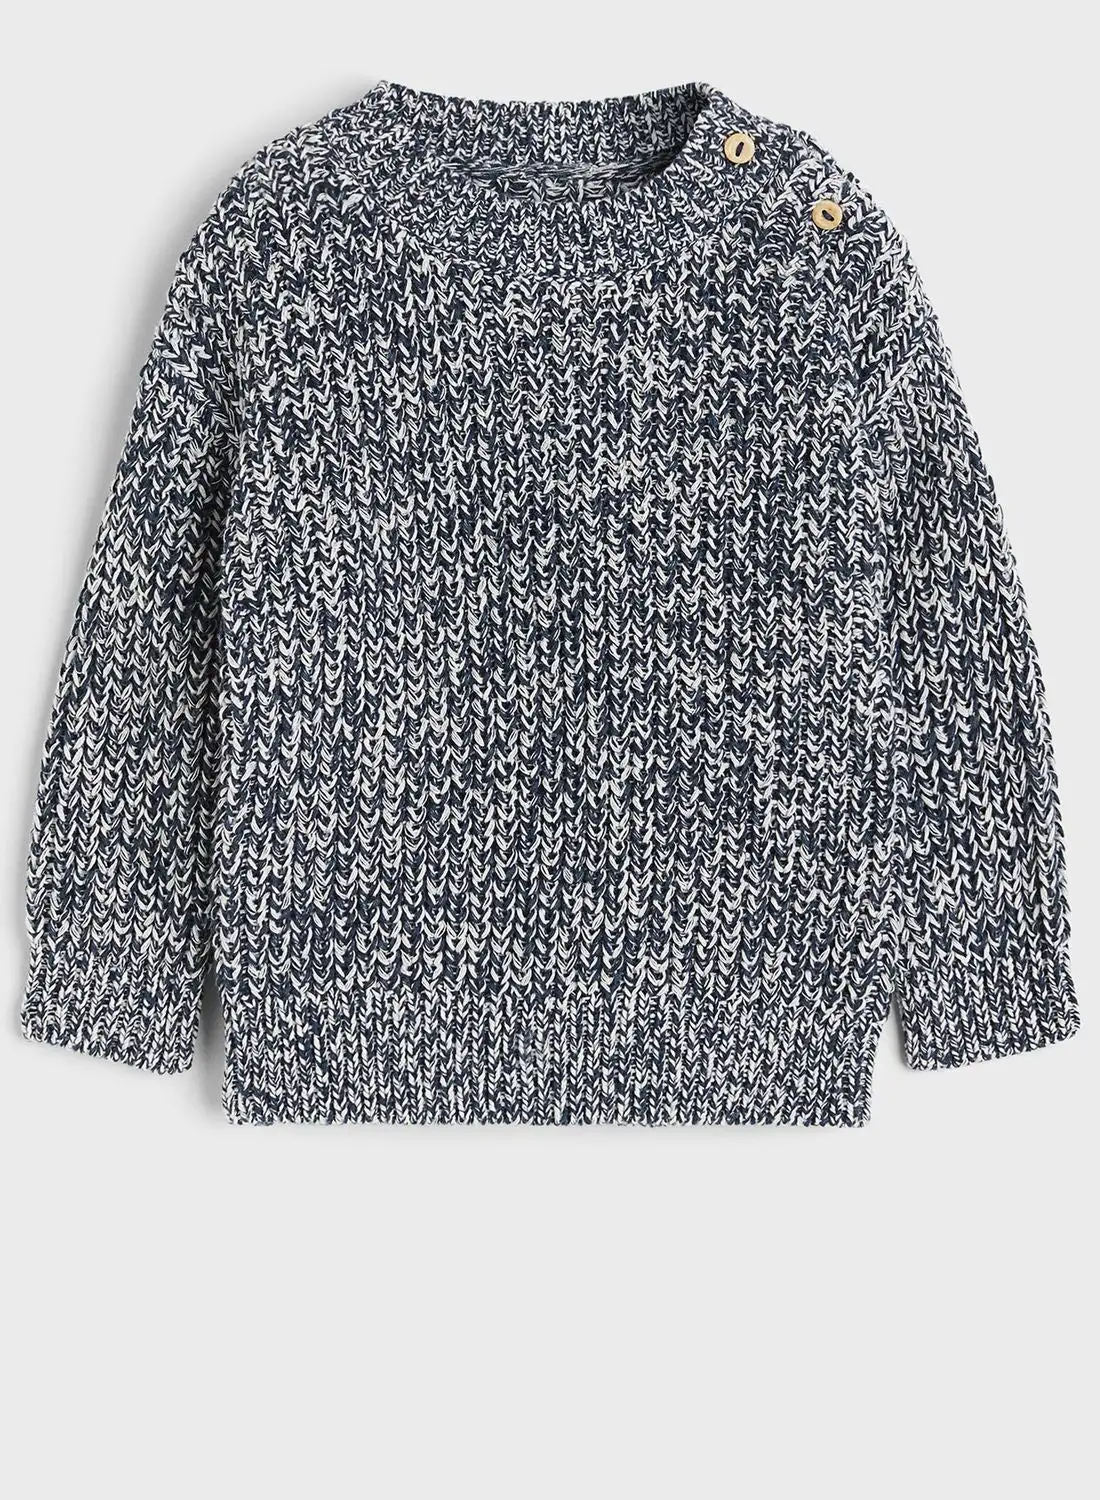 H&M Infant Knitted Sweater